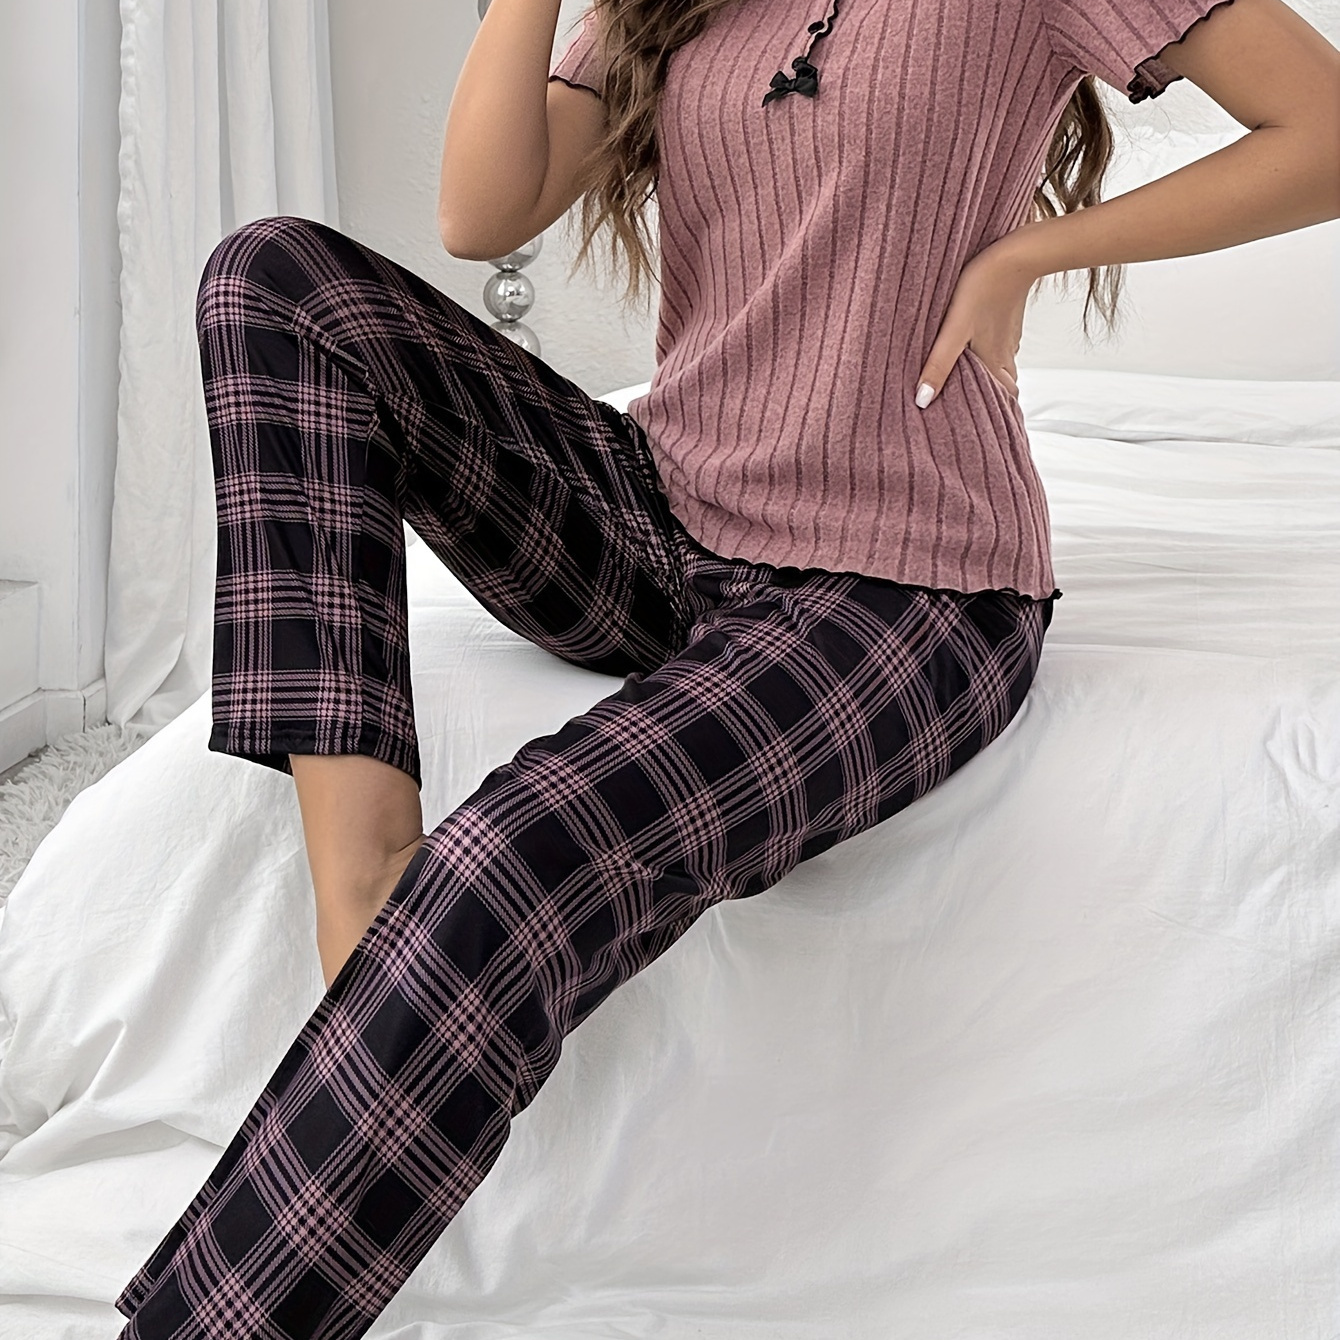 

Casual Solid Ribbed Pajama Set, Comfy Short Sleeve Button Decor Round Neck Top & Plaid Pants, Women's Sleepwear